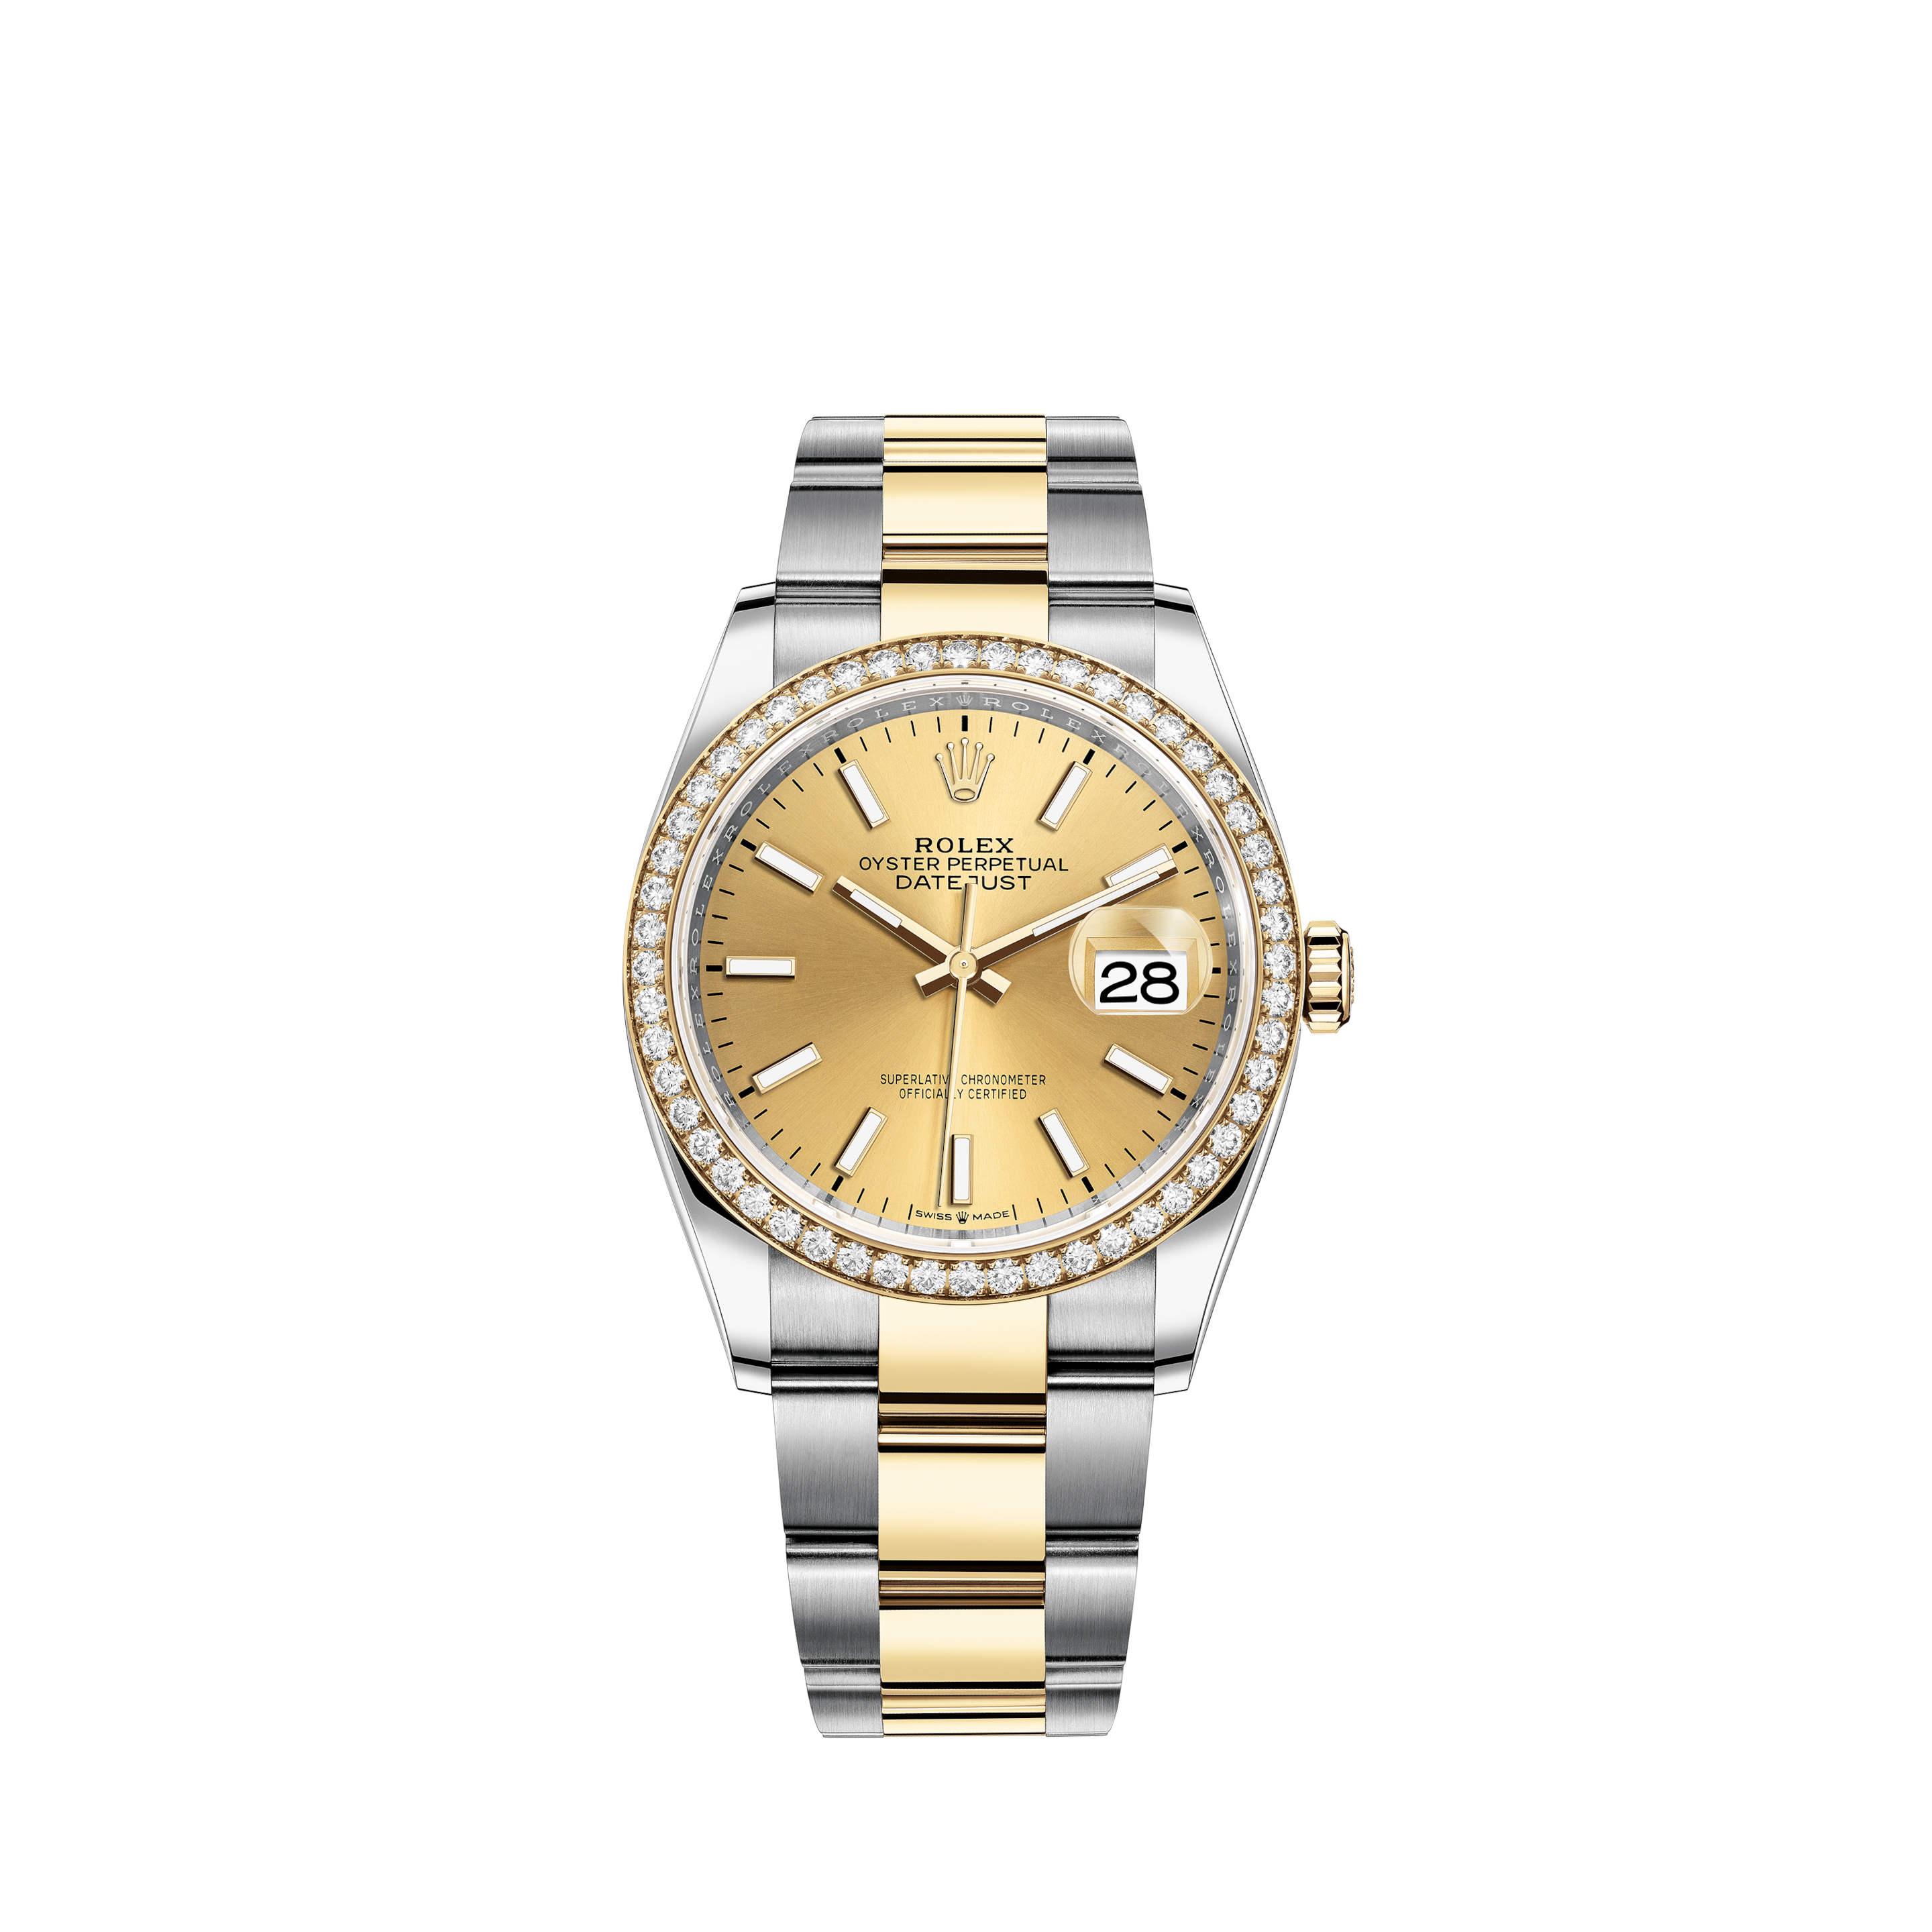 Rolex [204] U Circa 1997 Manufactured PRODUCT ROLEX Rolex Yachtmaster 68623 Blue Dial YG/SS Yellow Gold/Stainless Steel Automatic Date Display Old Unisex Watches